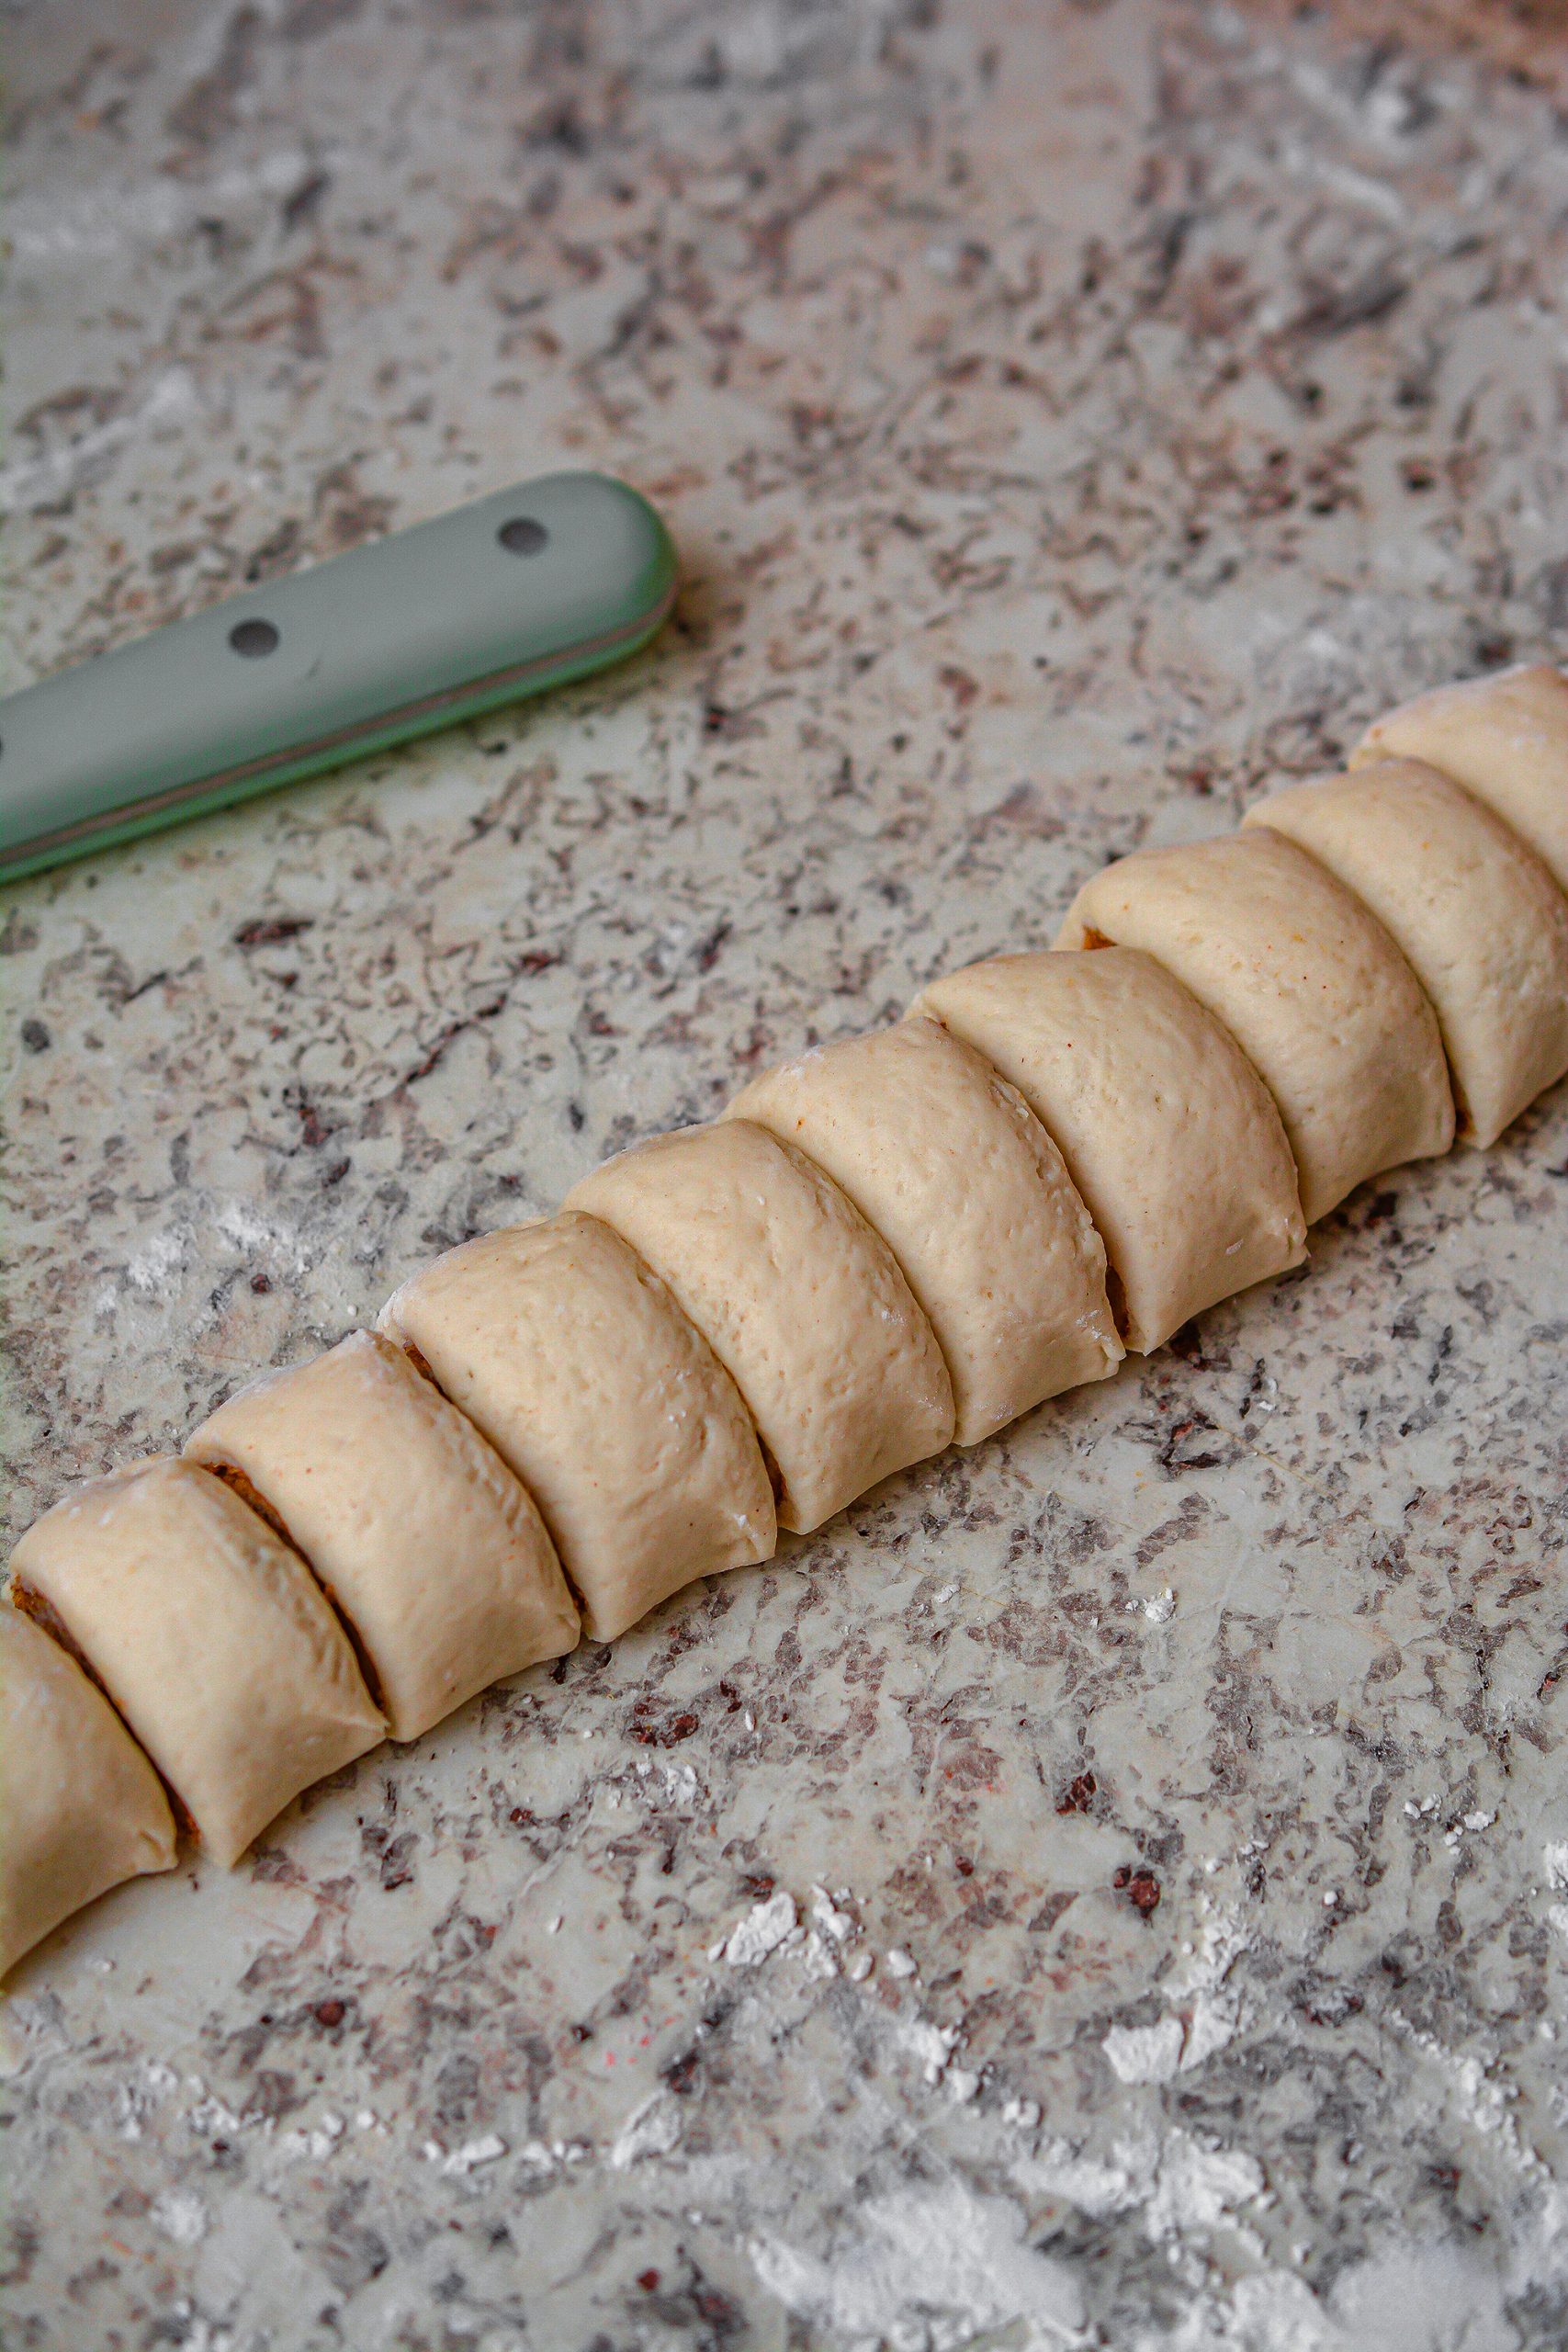 Cut the ends off of each log of dough, and then slice each log into 12 even pieces.